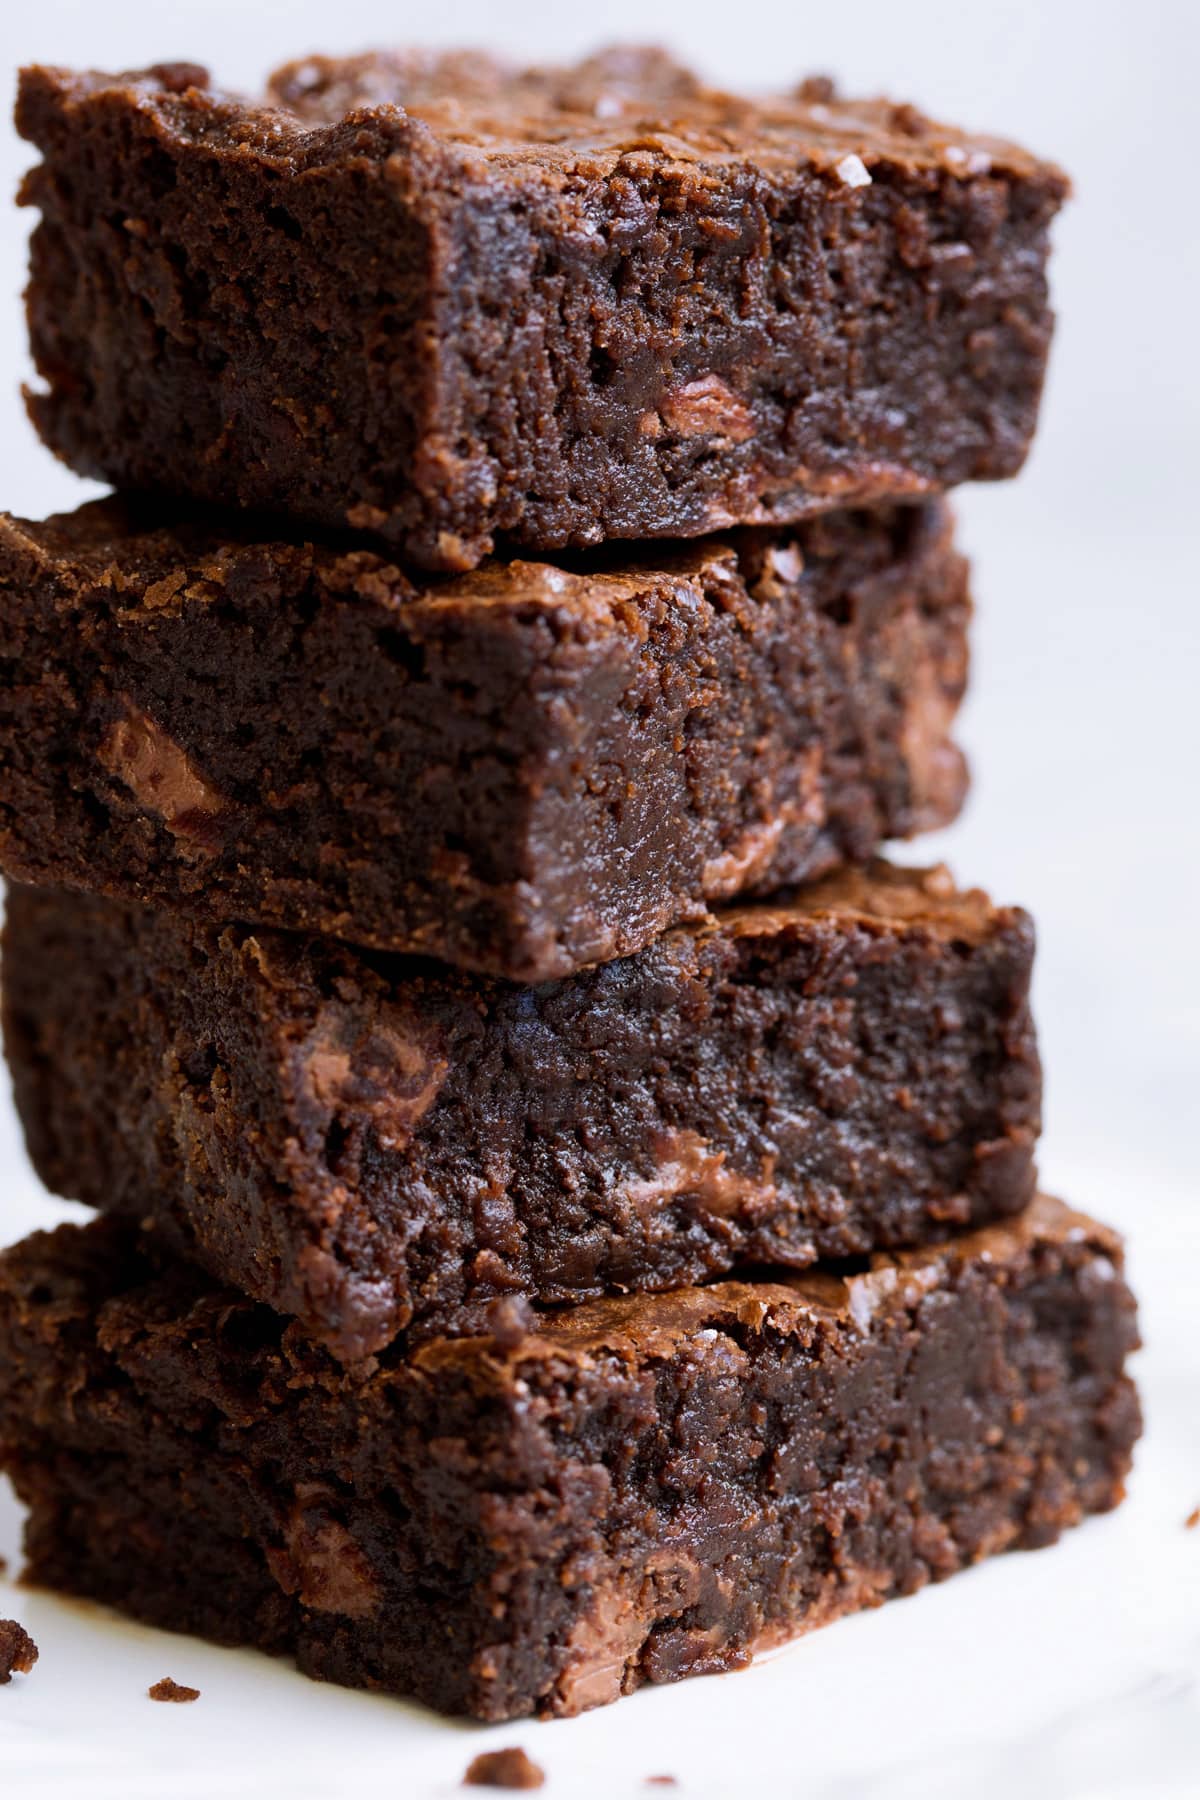 Close up image showing texture of homemade brownies.